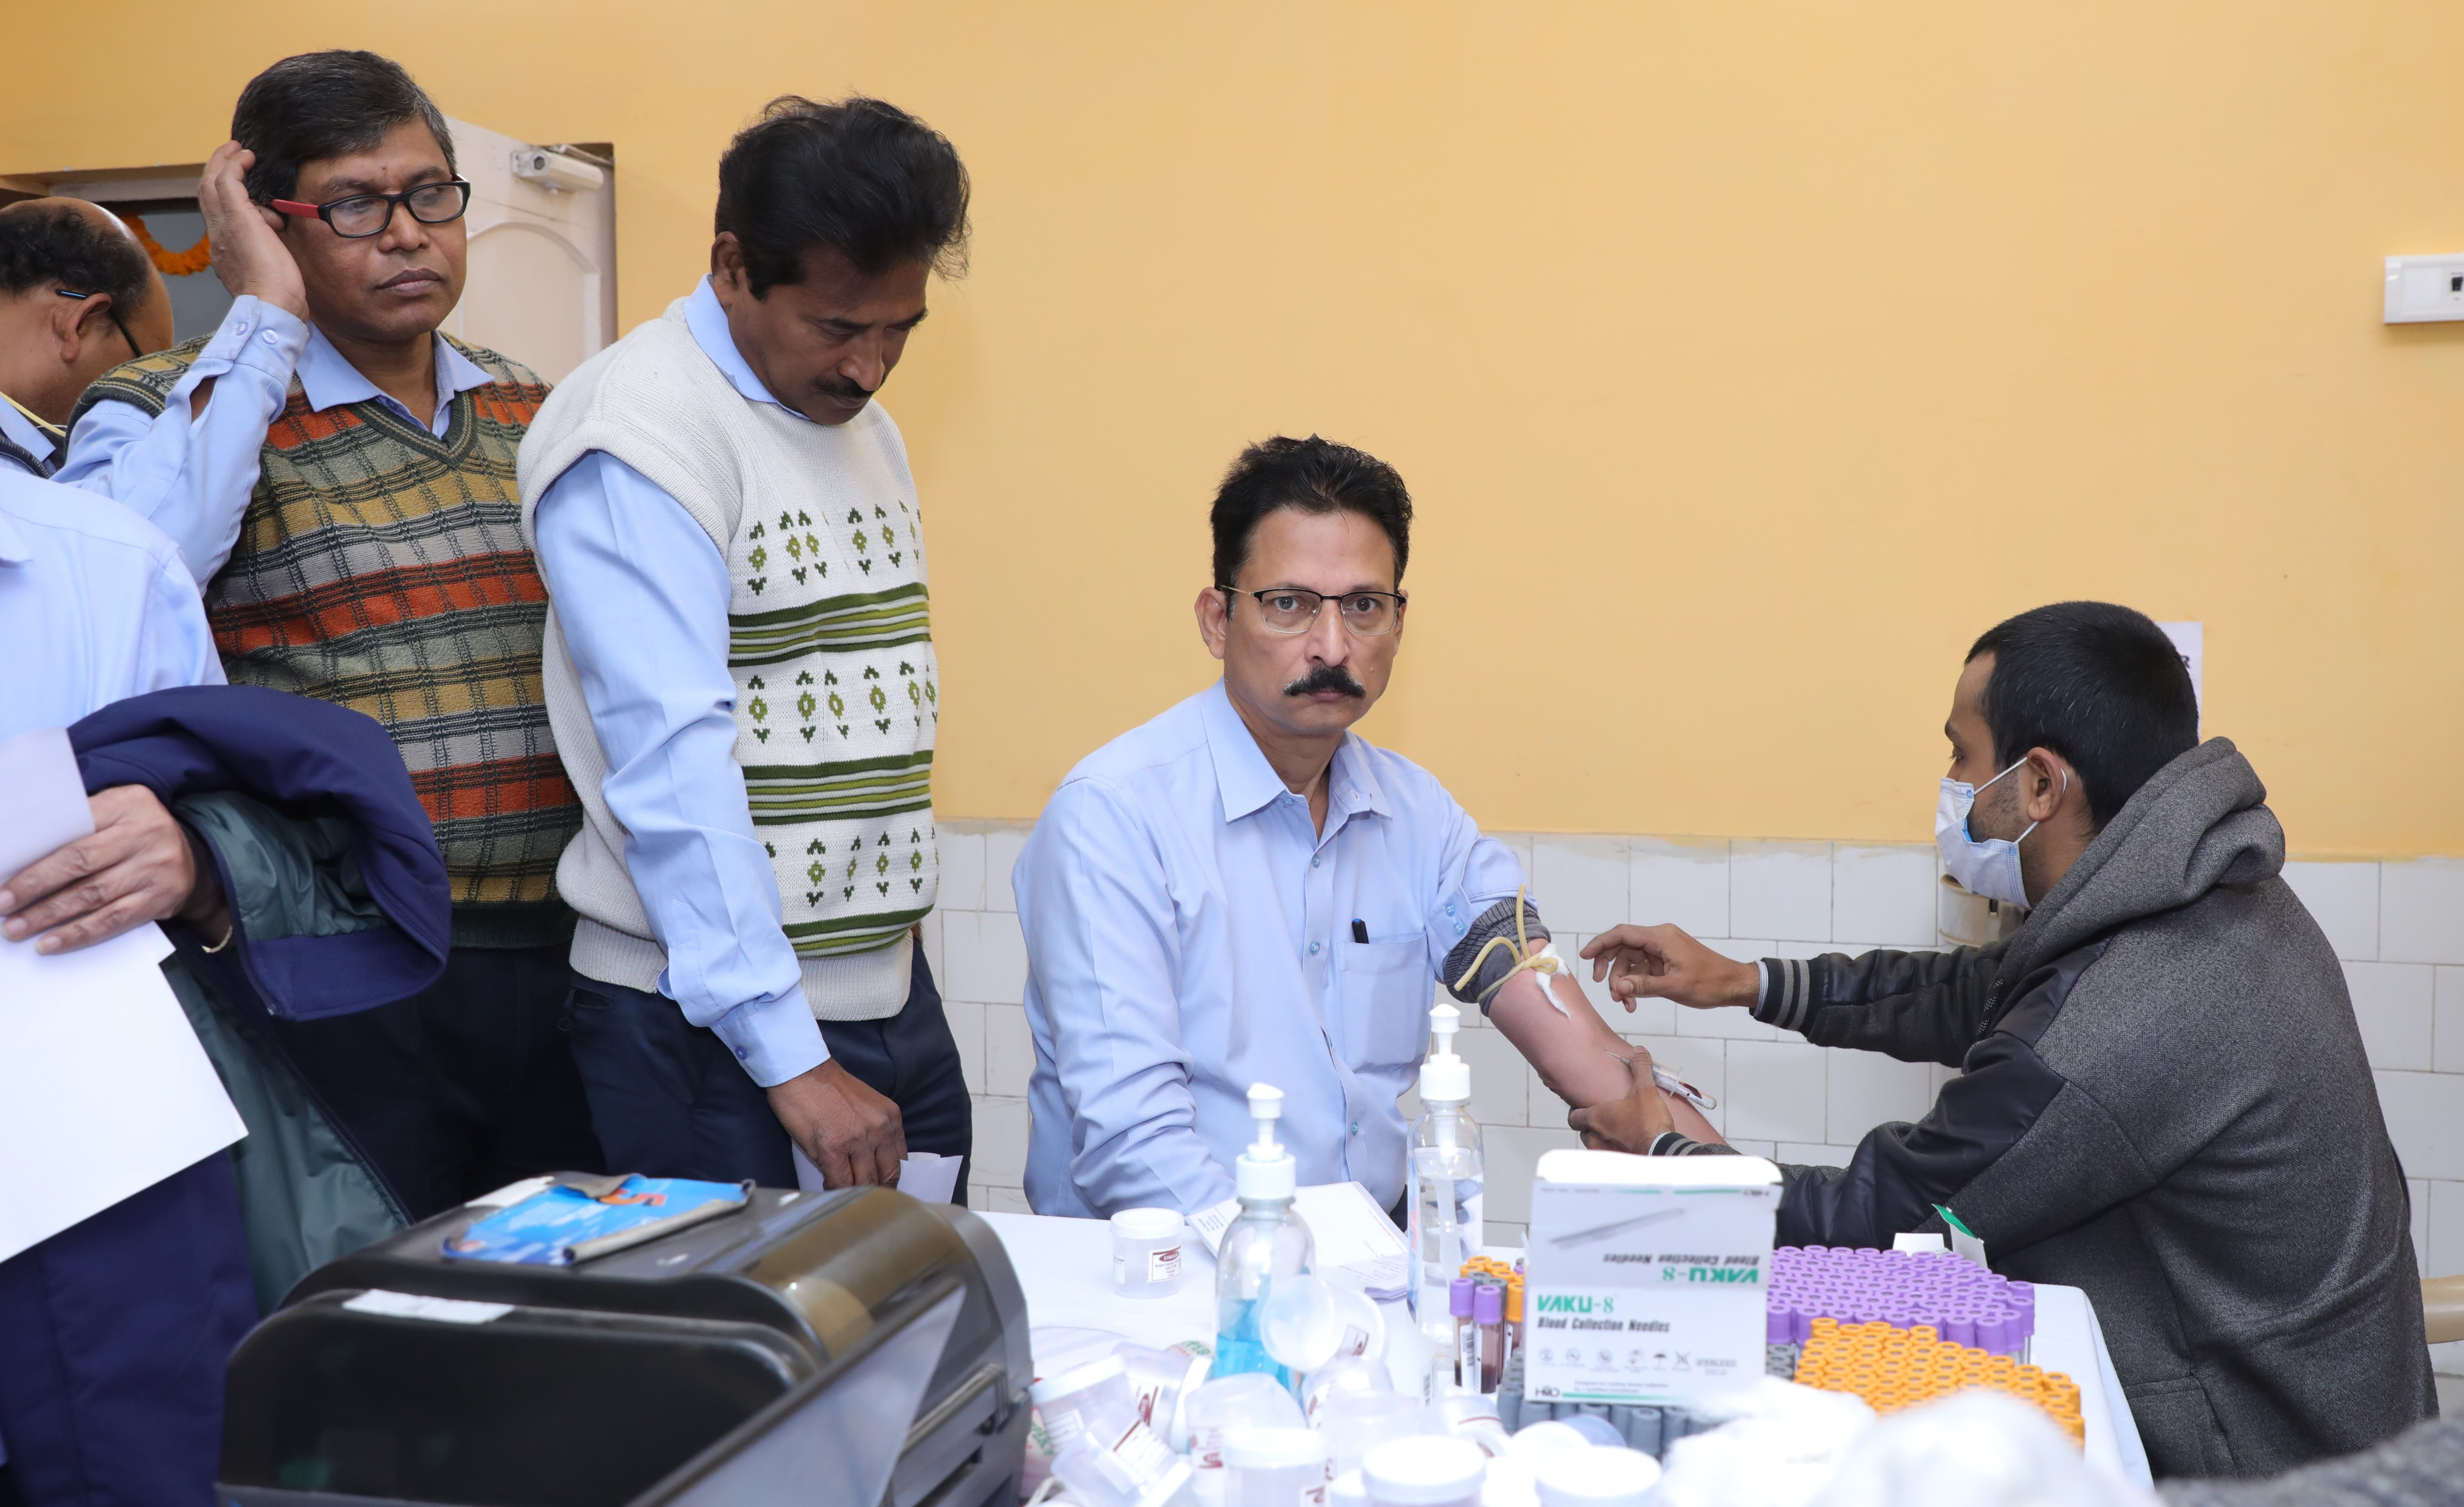 GRSE Annual Health Check-Up 2023 organised on 19 Jan 23